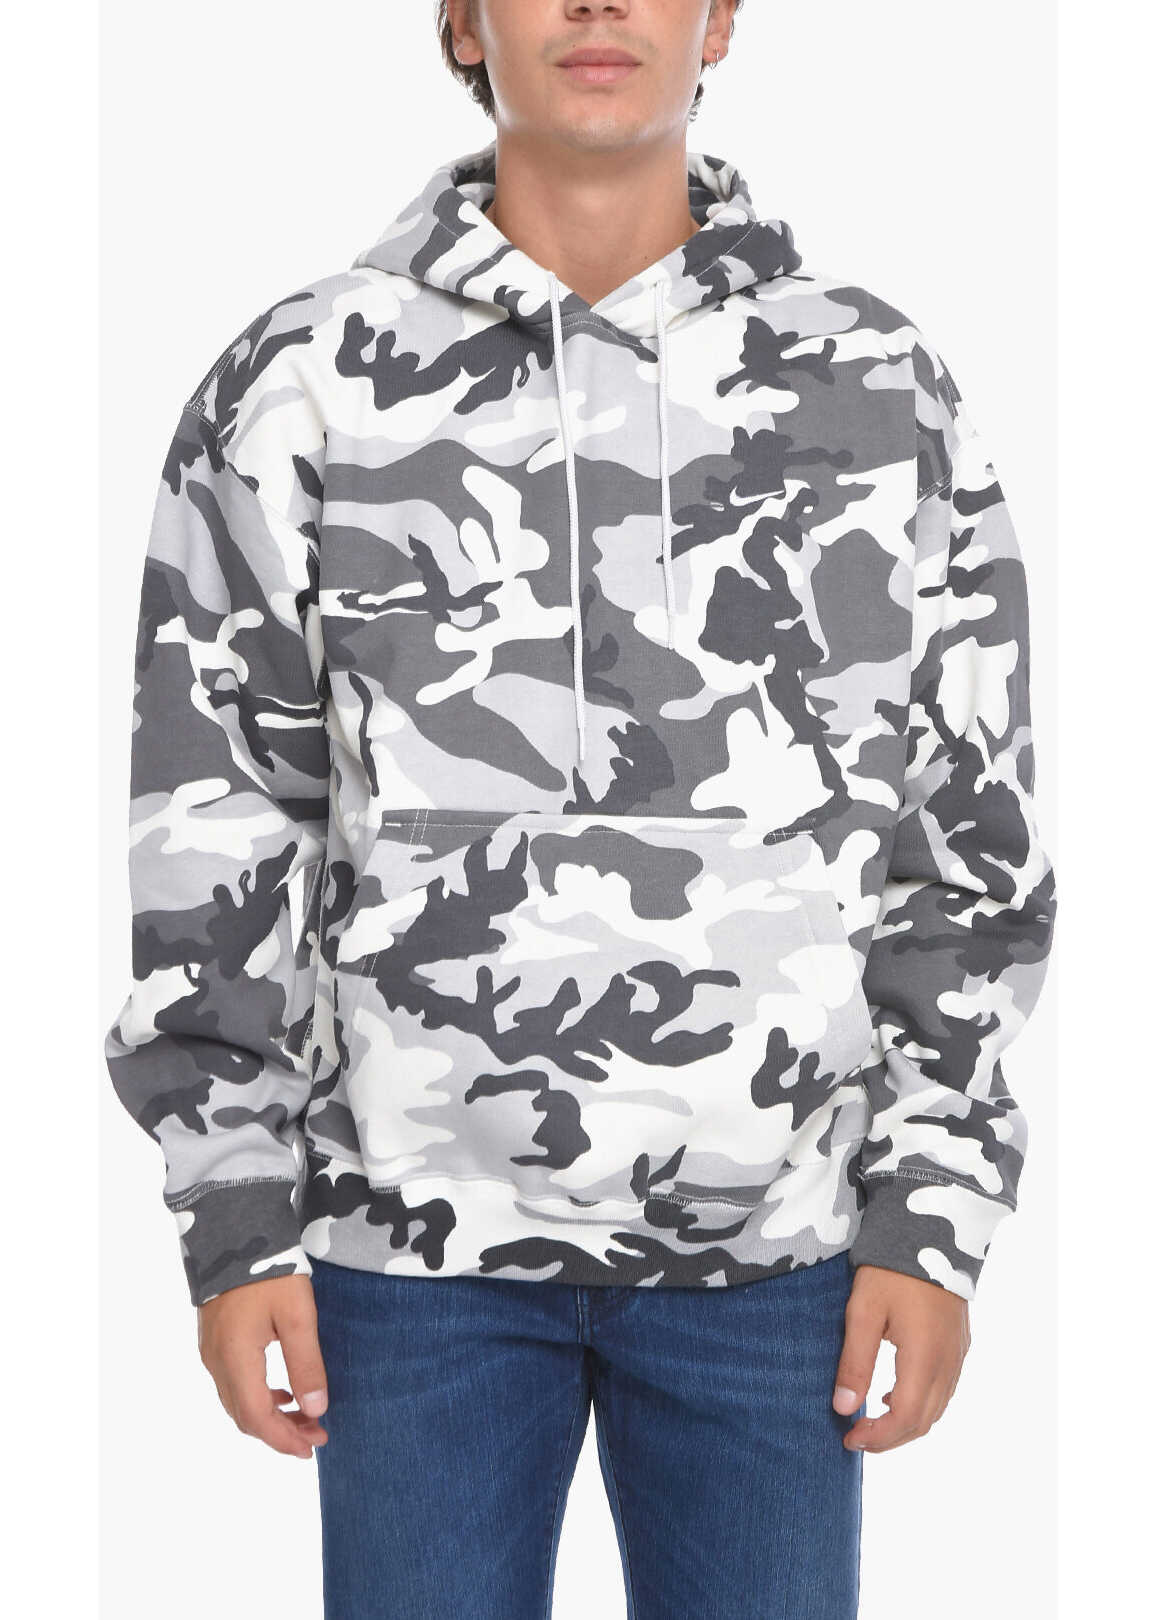 Nike Camouflage Hoodie With Patch Pocket Gray